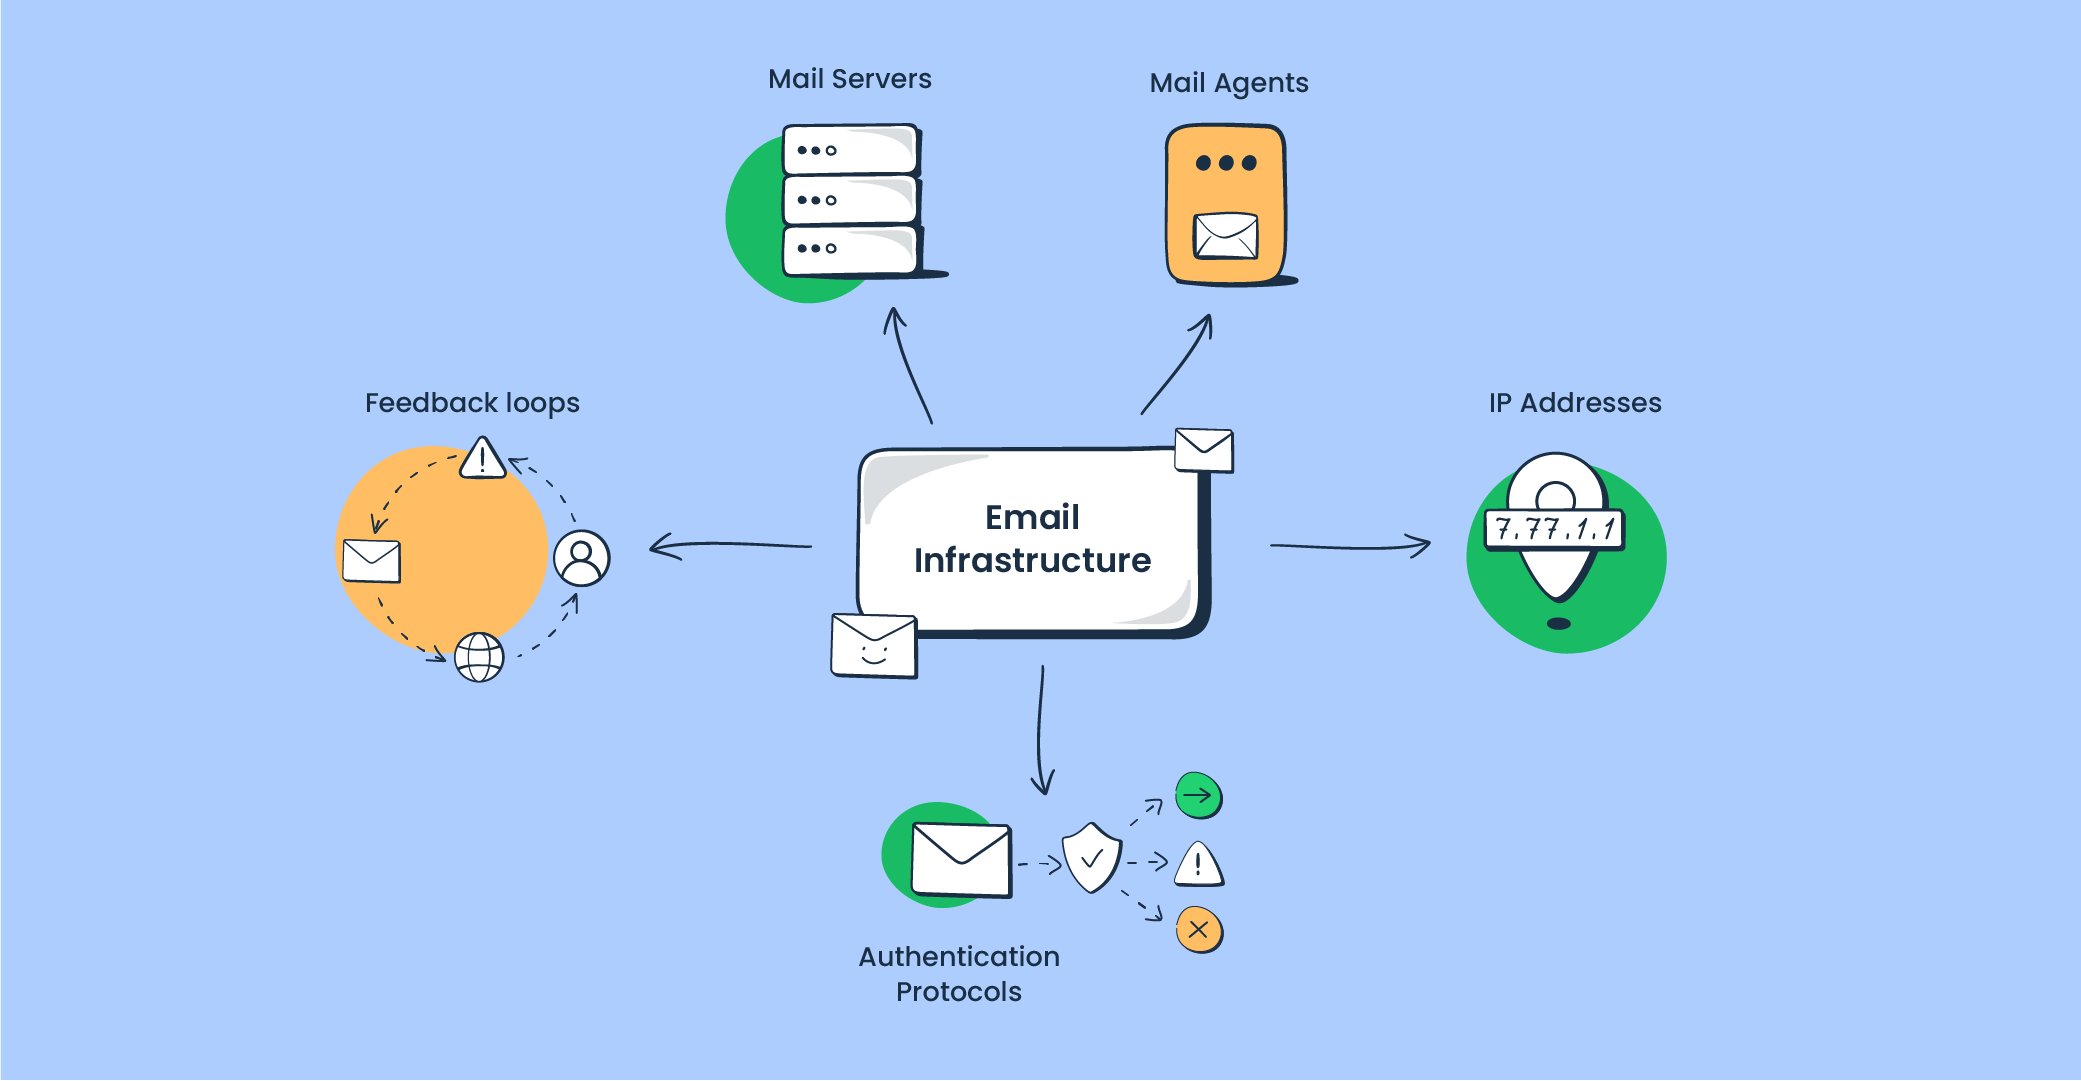 Components of email infrastructure: mail servers, mail agents, IP addresses, feedback loops, authentication protocols